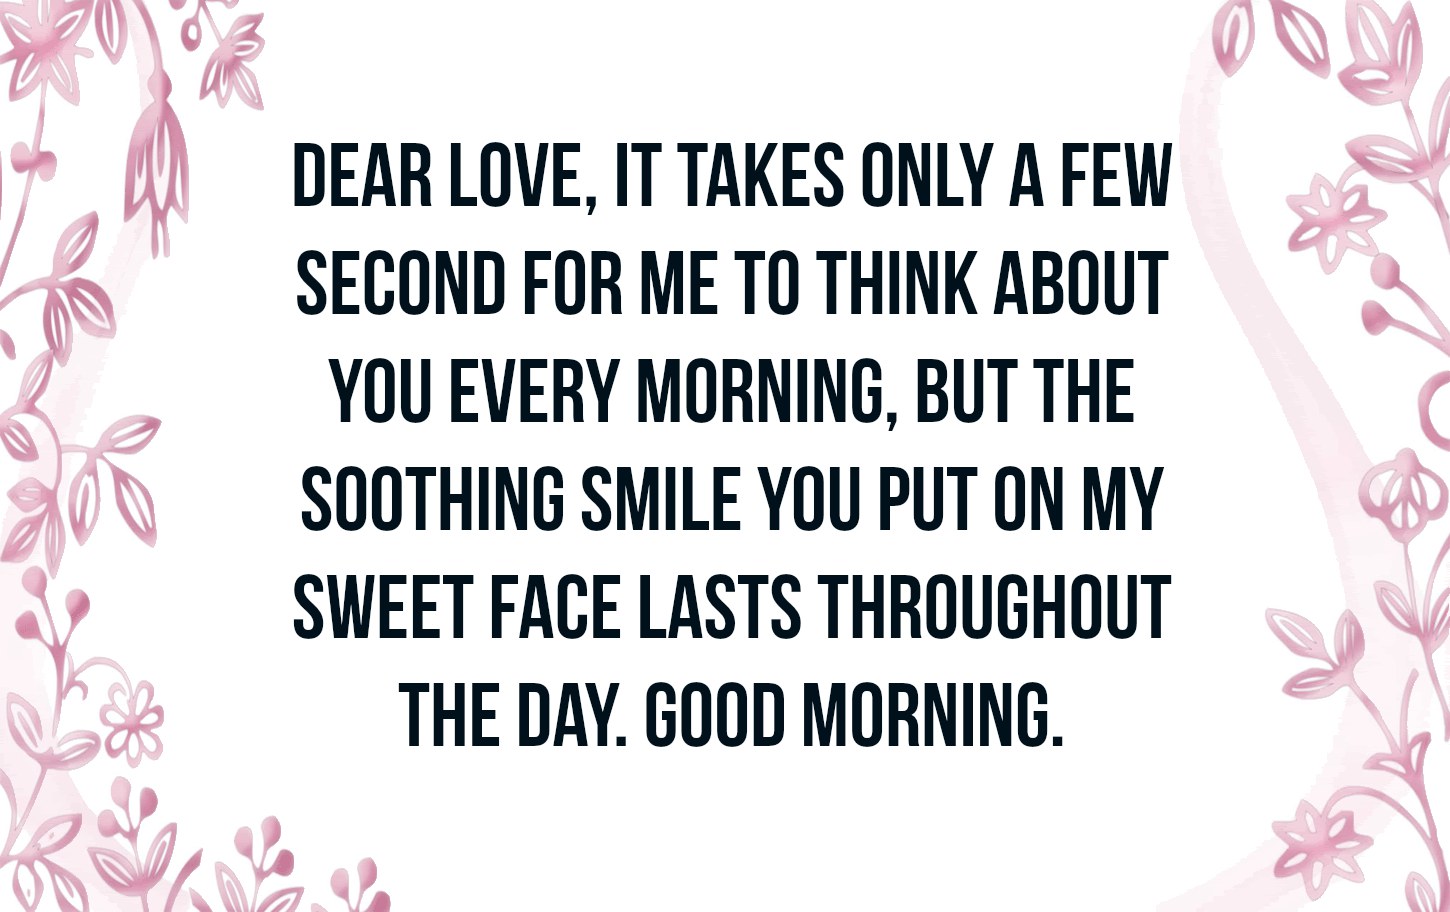 Good Morning Love Quote For Her 6 | QuoteReel